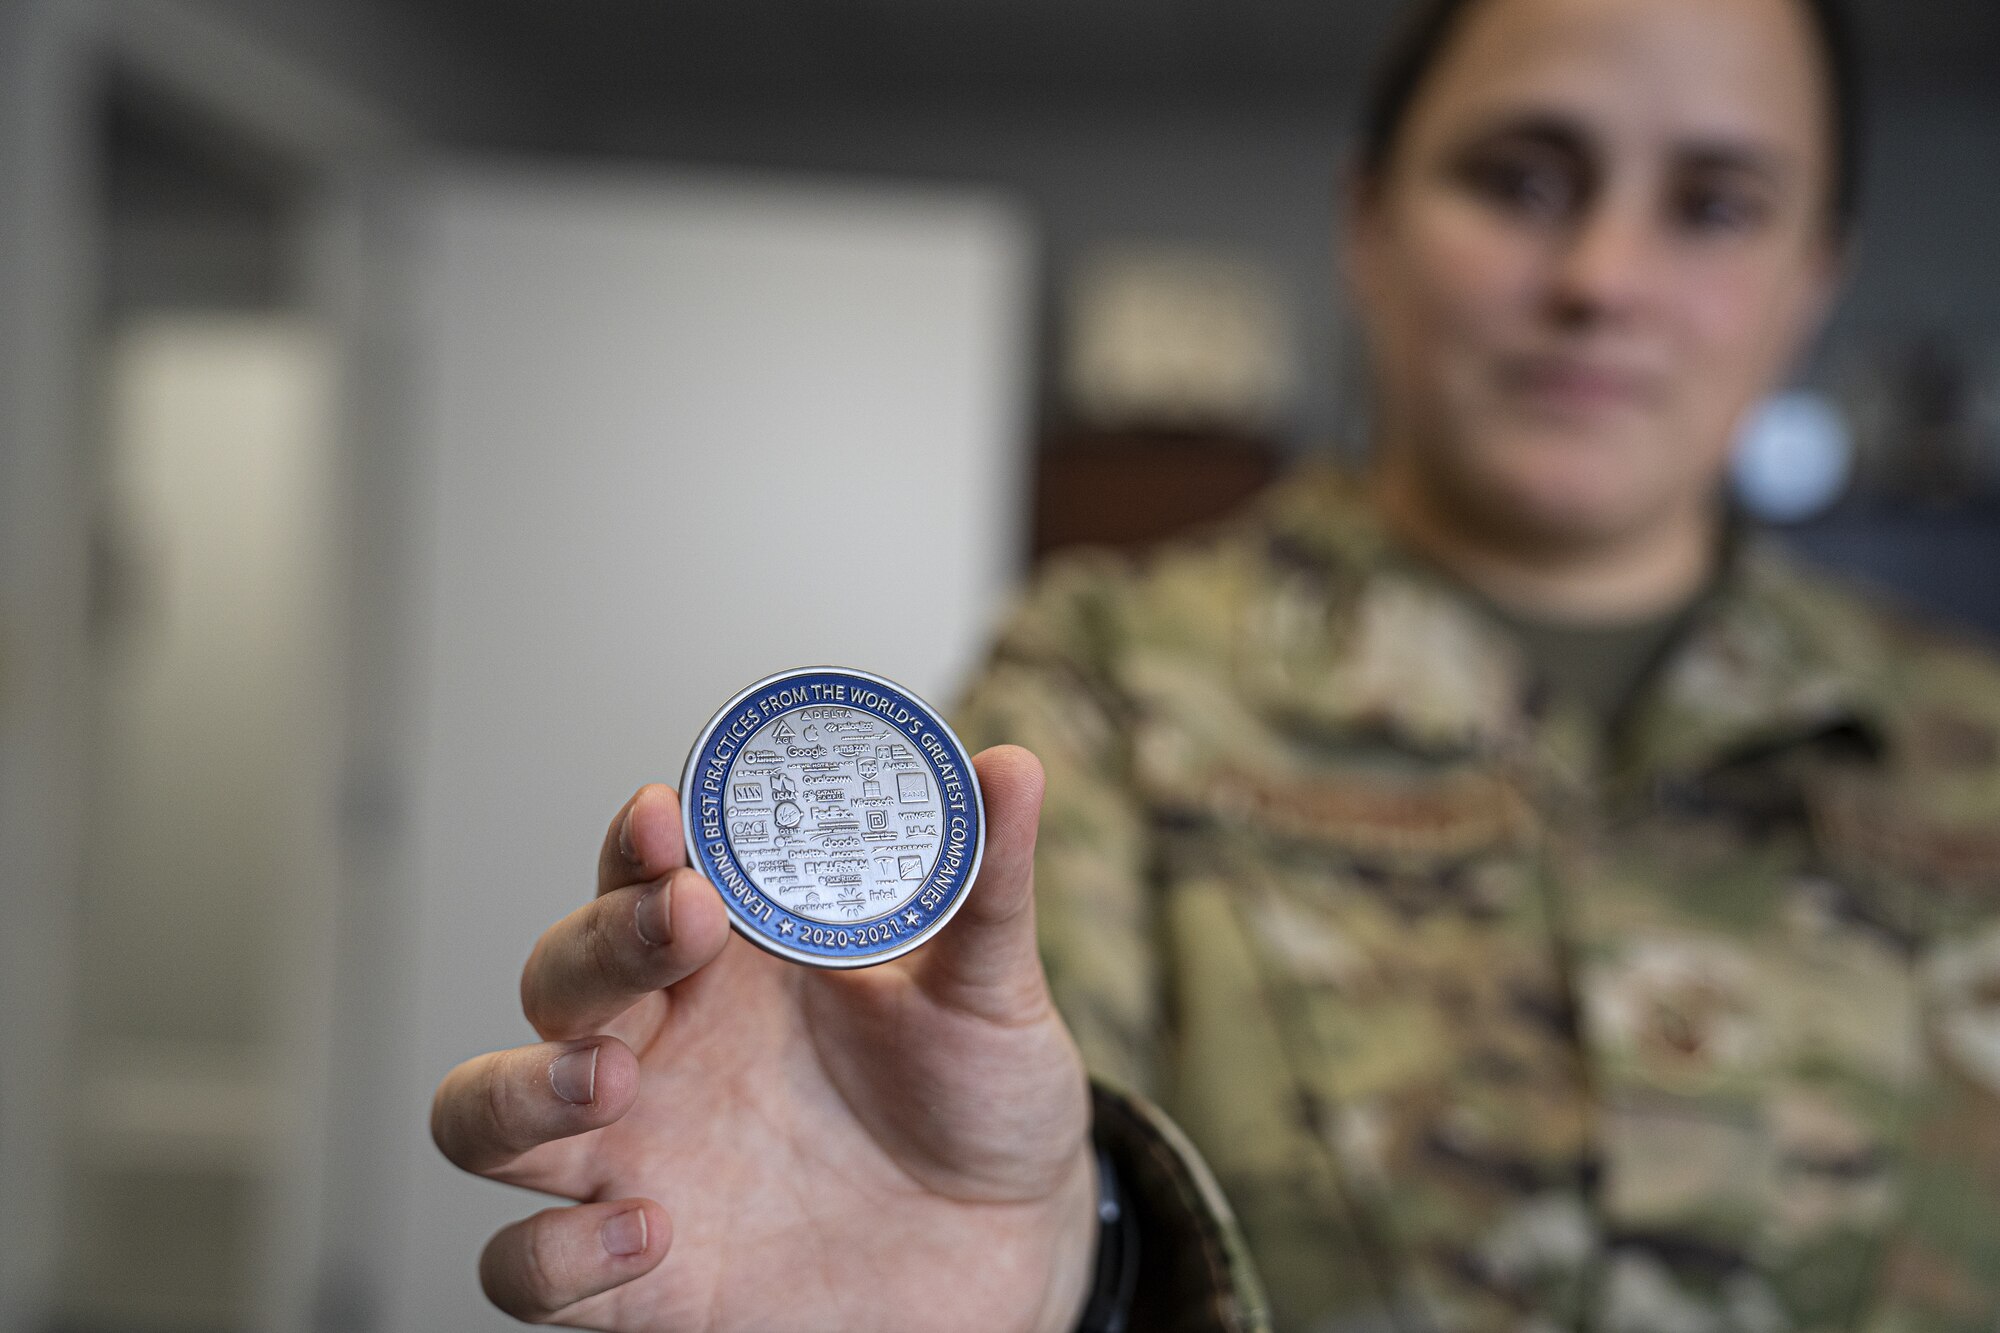 U.S. Air Force Master Sgt. Alexandria Verissimo, 81st Training Wing executive support services superintendent, presents an Education With Industry coin at Keesler Air Force Base, Mississippi, July 26, 2022. Education With Industry is a program that allows service members and civilians to be imbedded into companies to learn professional competencies. (U.S Air Force photo by Airman 1st Class Trenten Walters)